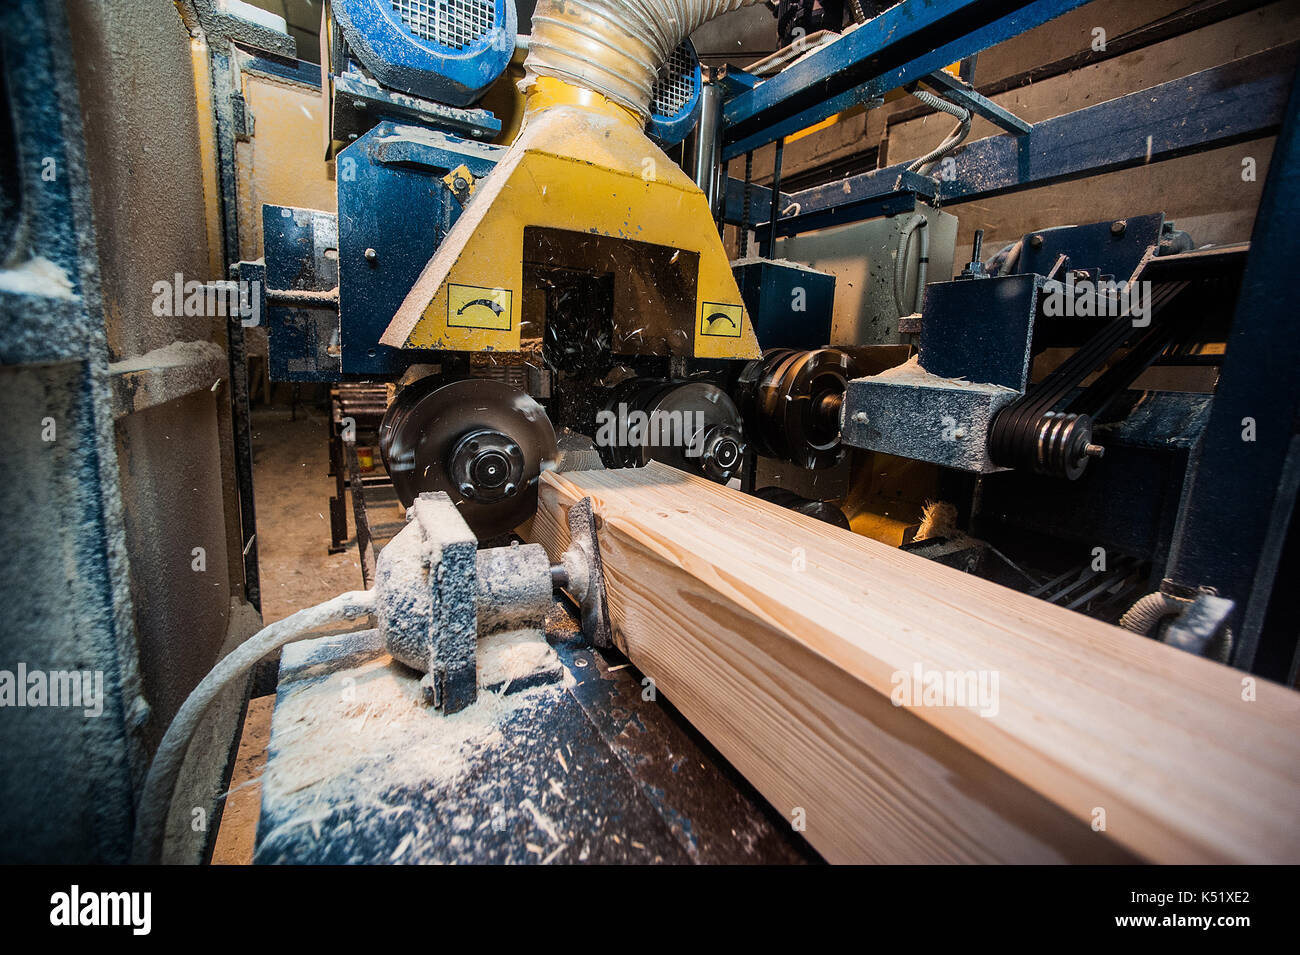 The machine for sampling the groove in a wooden beam. in progress from afar Stock Photo